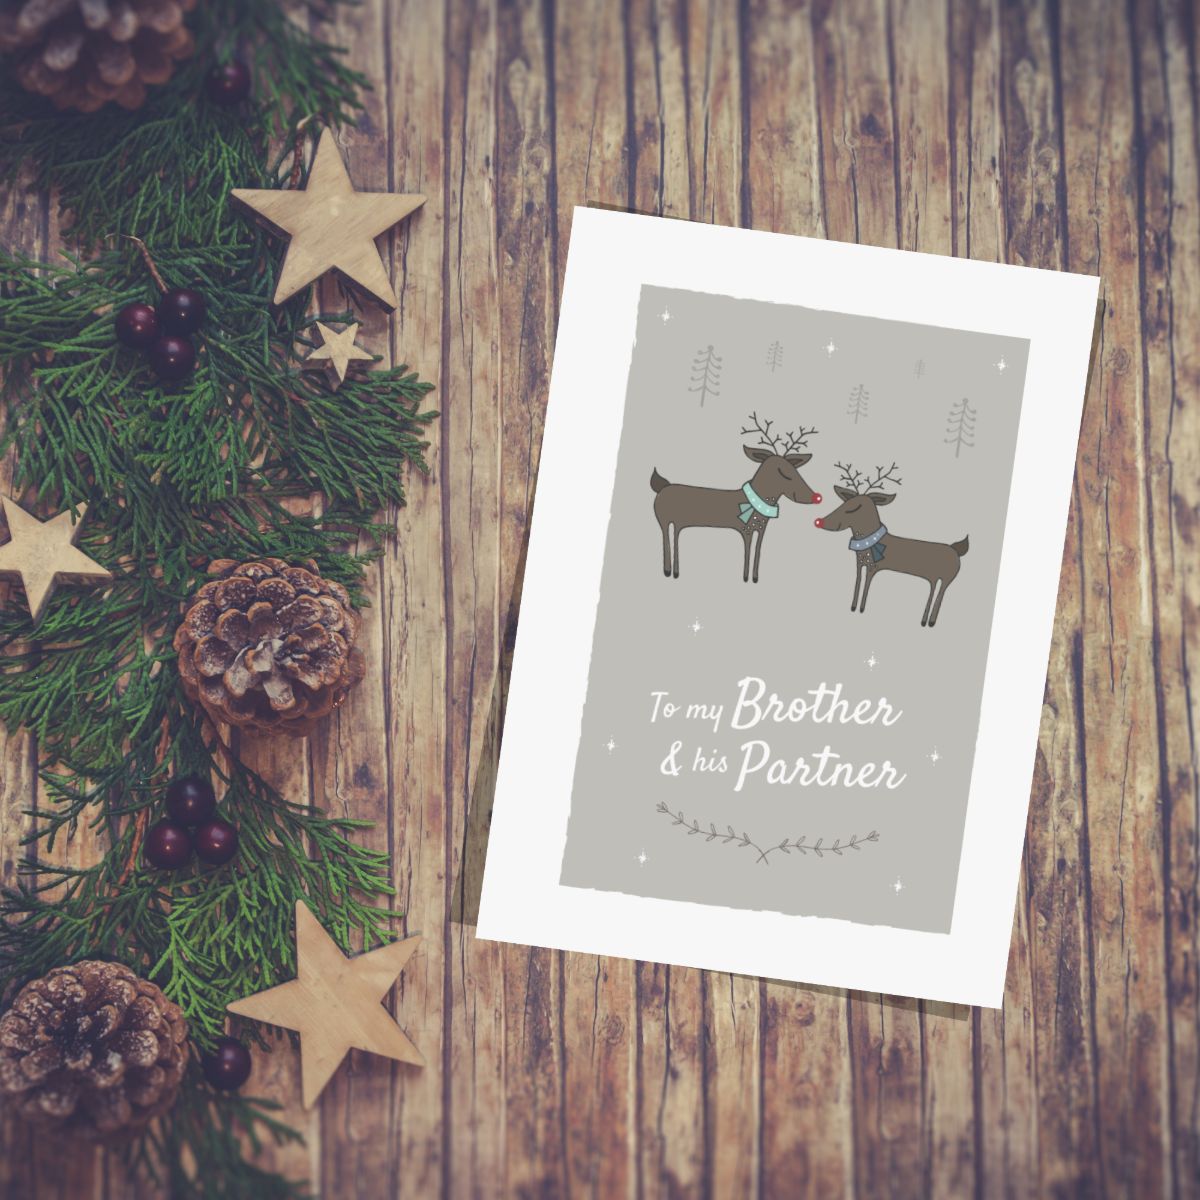 To my Brother and his Partner Reindeer Design Christmas Card